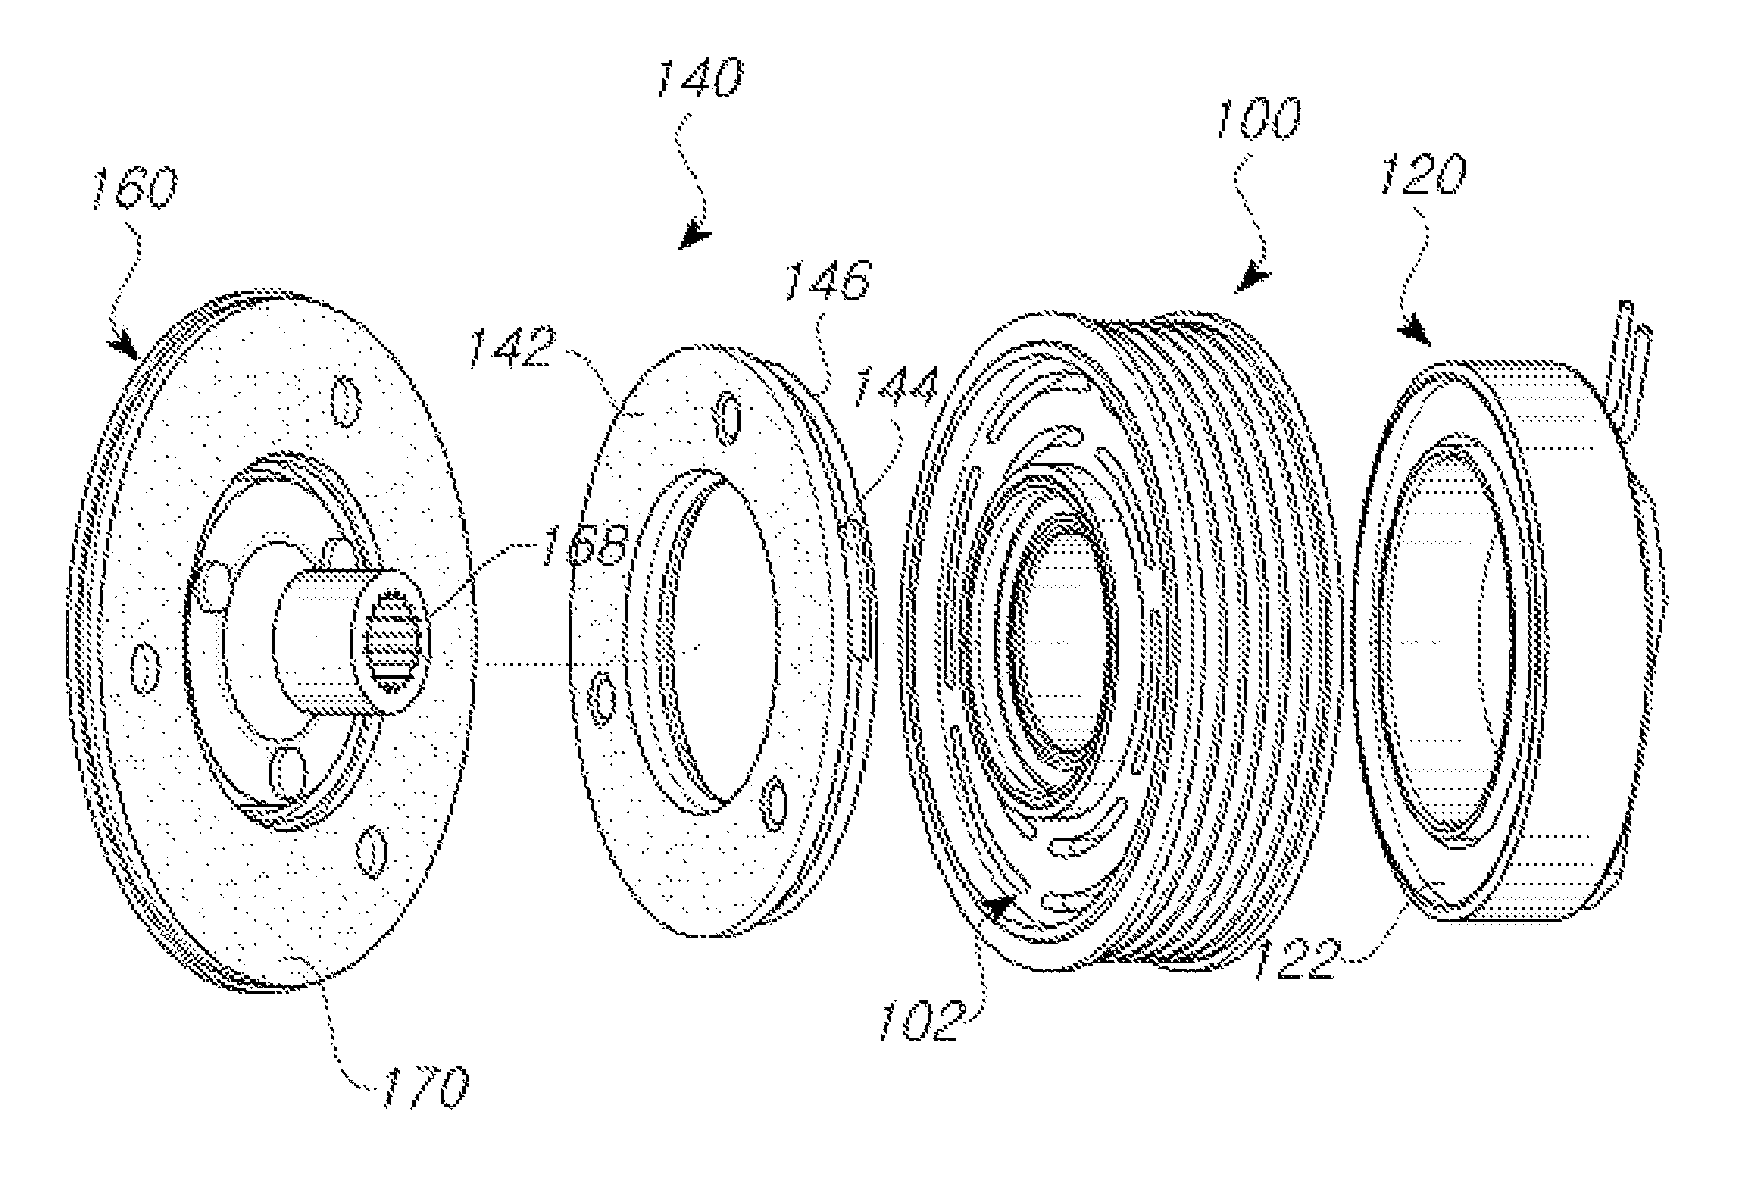 Power transmission device for a water pump